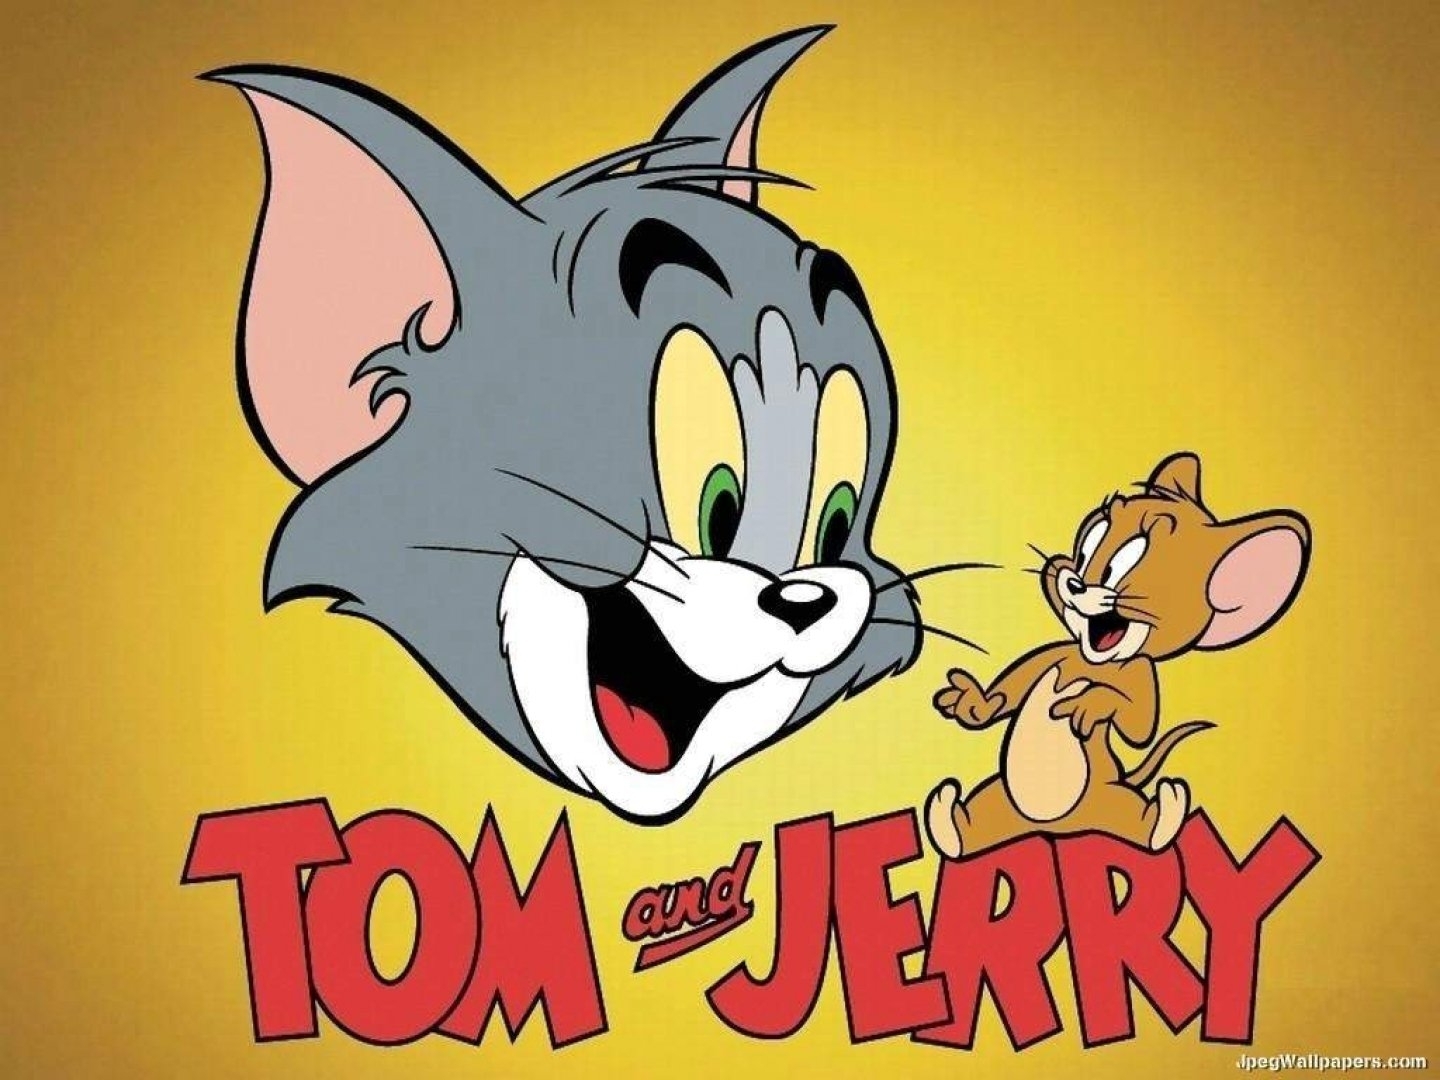 10 Best Tom And Jerry Wallpaper FULL HD 1080p For PC Background